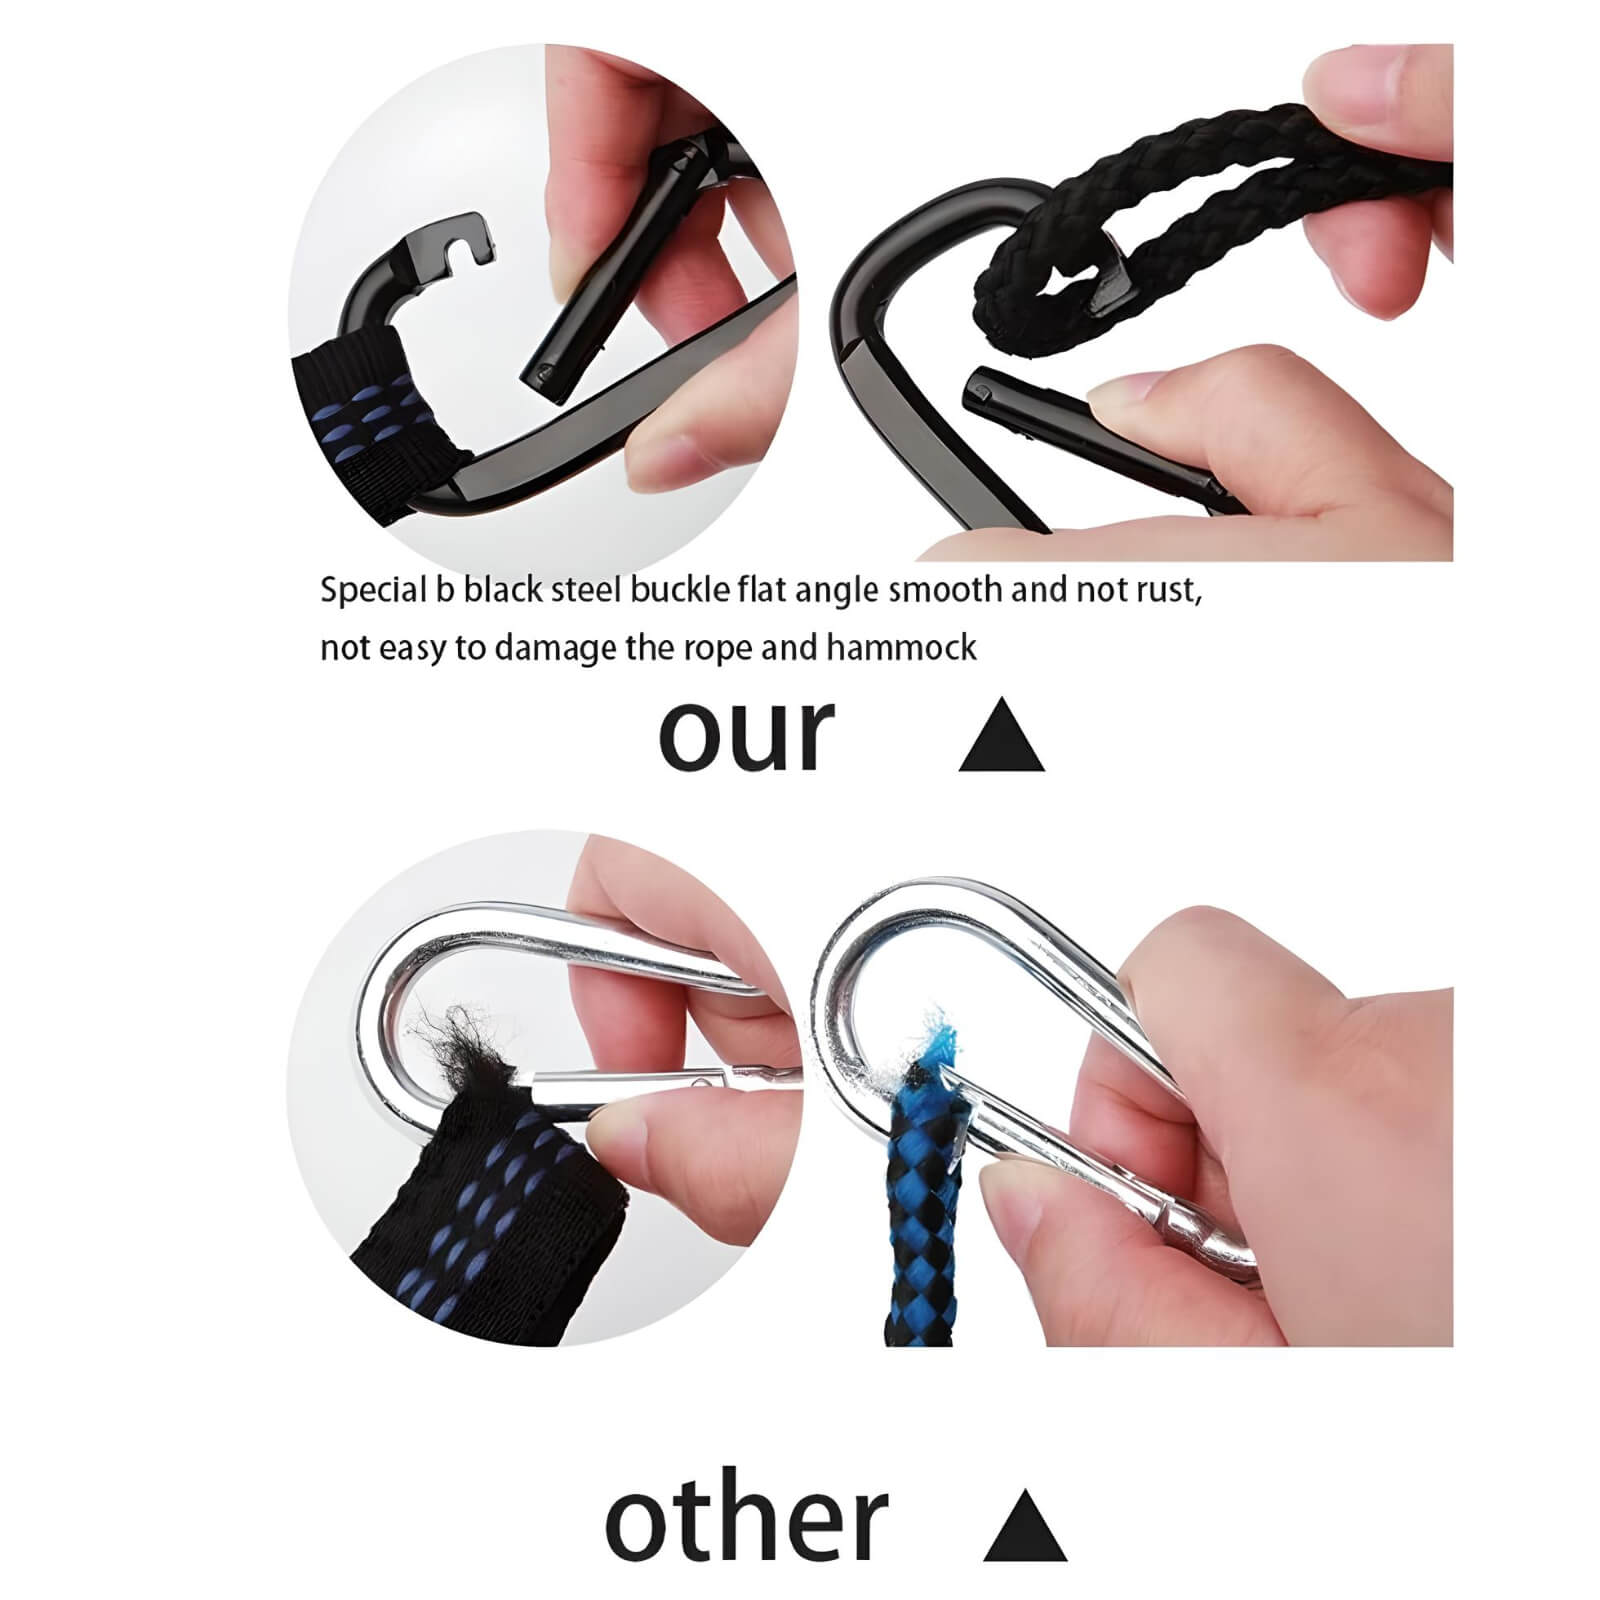 light-weight-back-packing-hammock-buckle-comparision